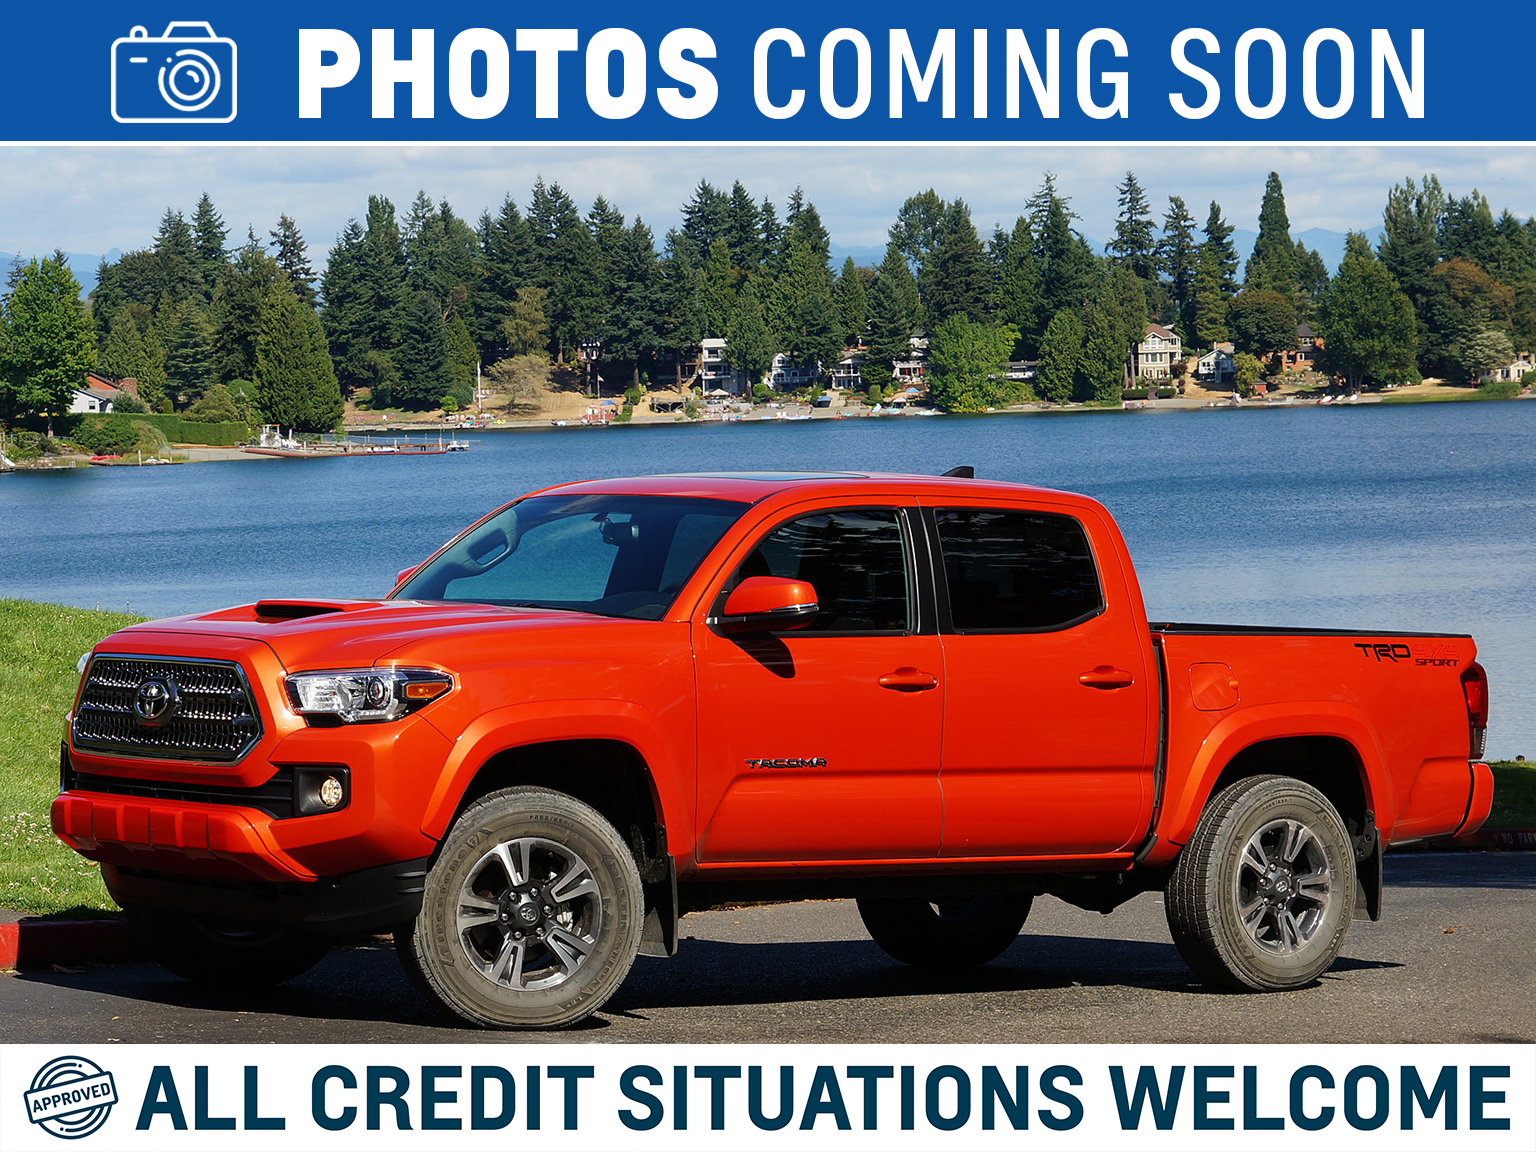 2018 Toyota Tacoma TRD SPORT MANUAL, LEATHER, ROOF, GPS. NEW BRAKES!!